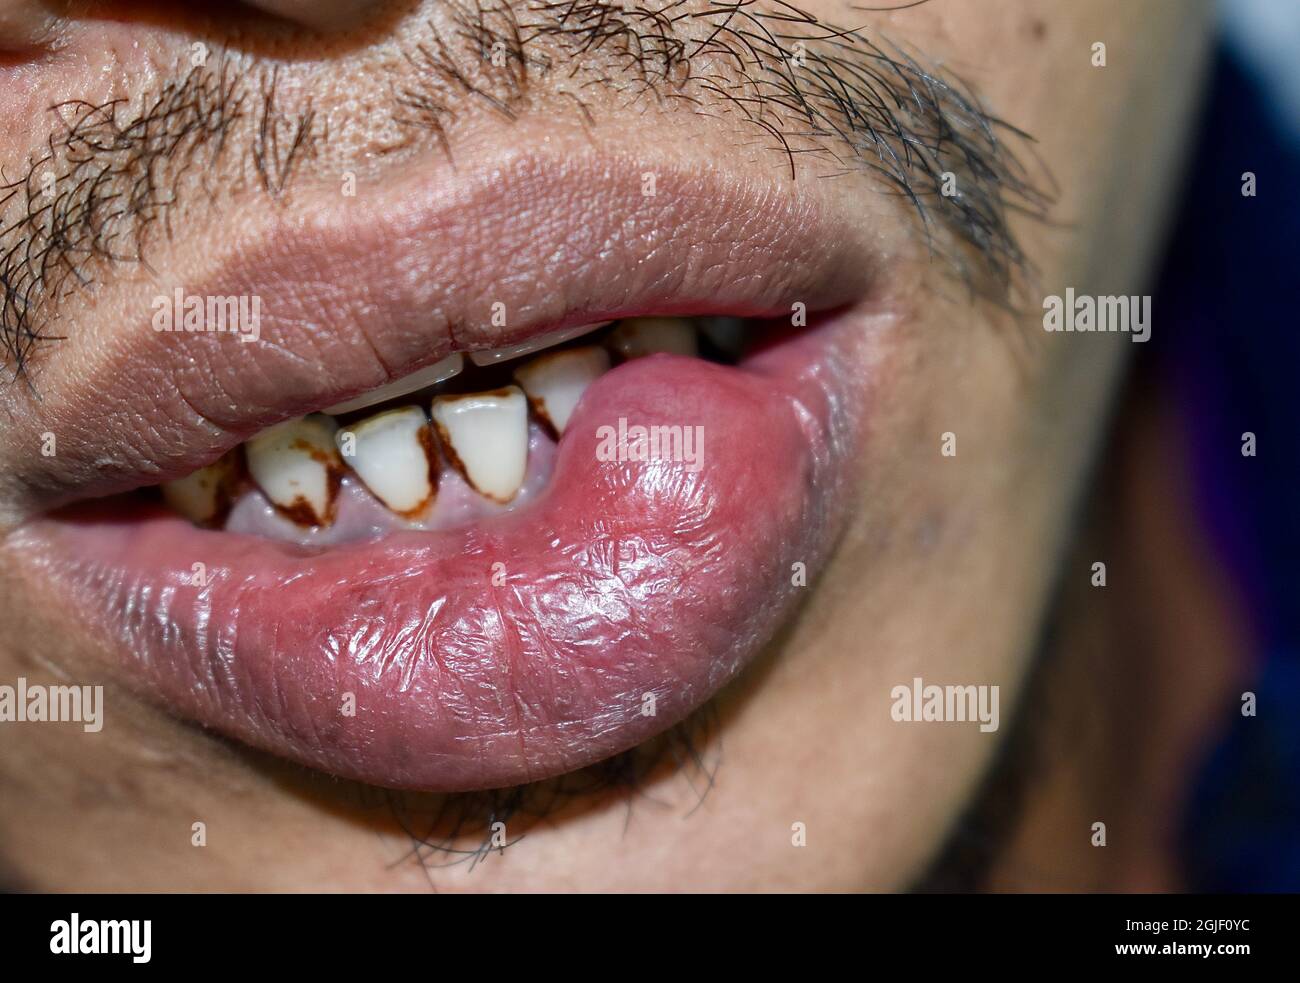 Abscess or cyst with pus at lower lip of Asian man. Stock Photo